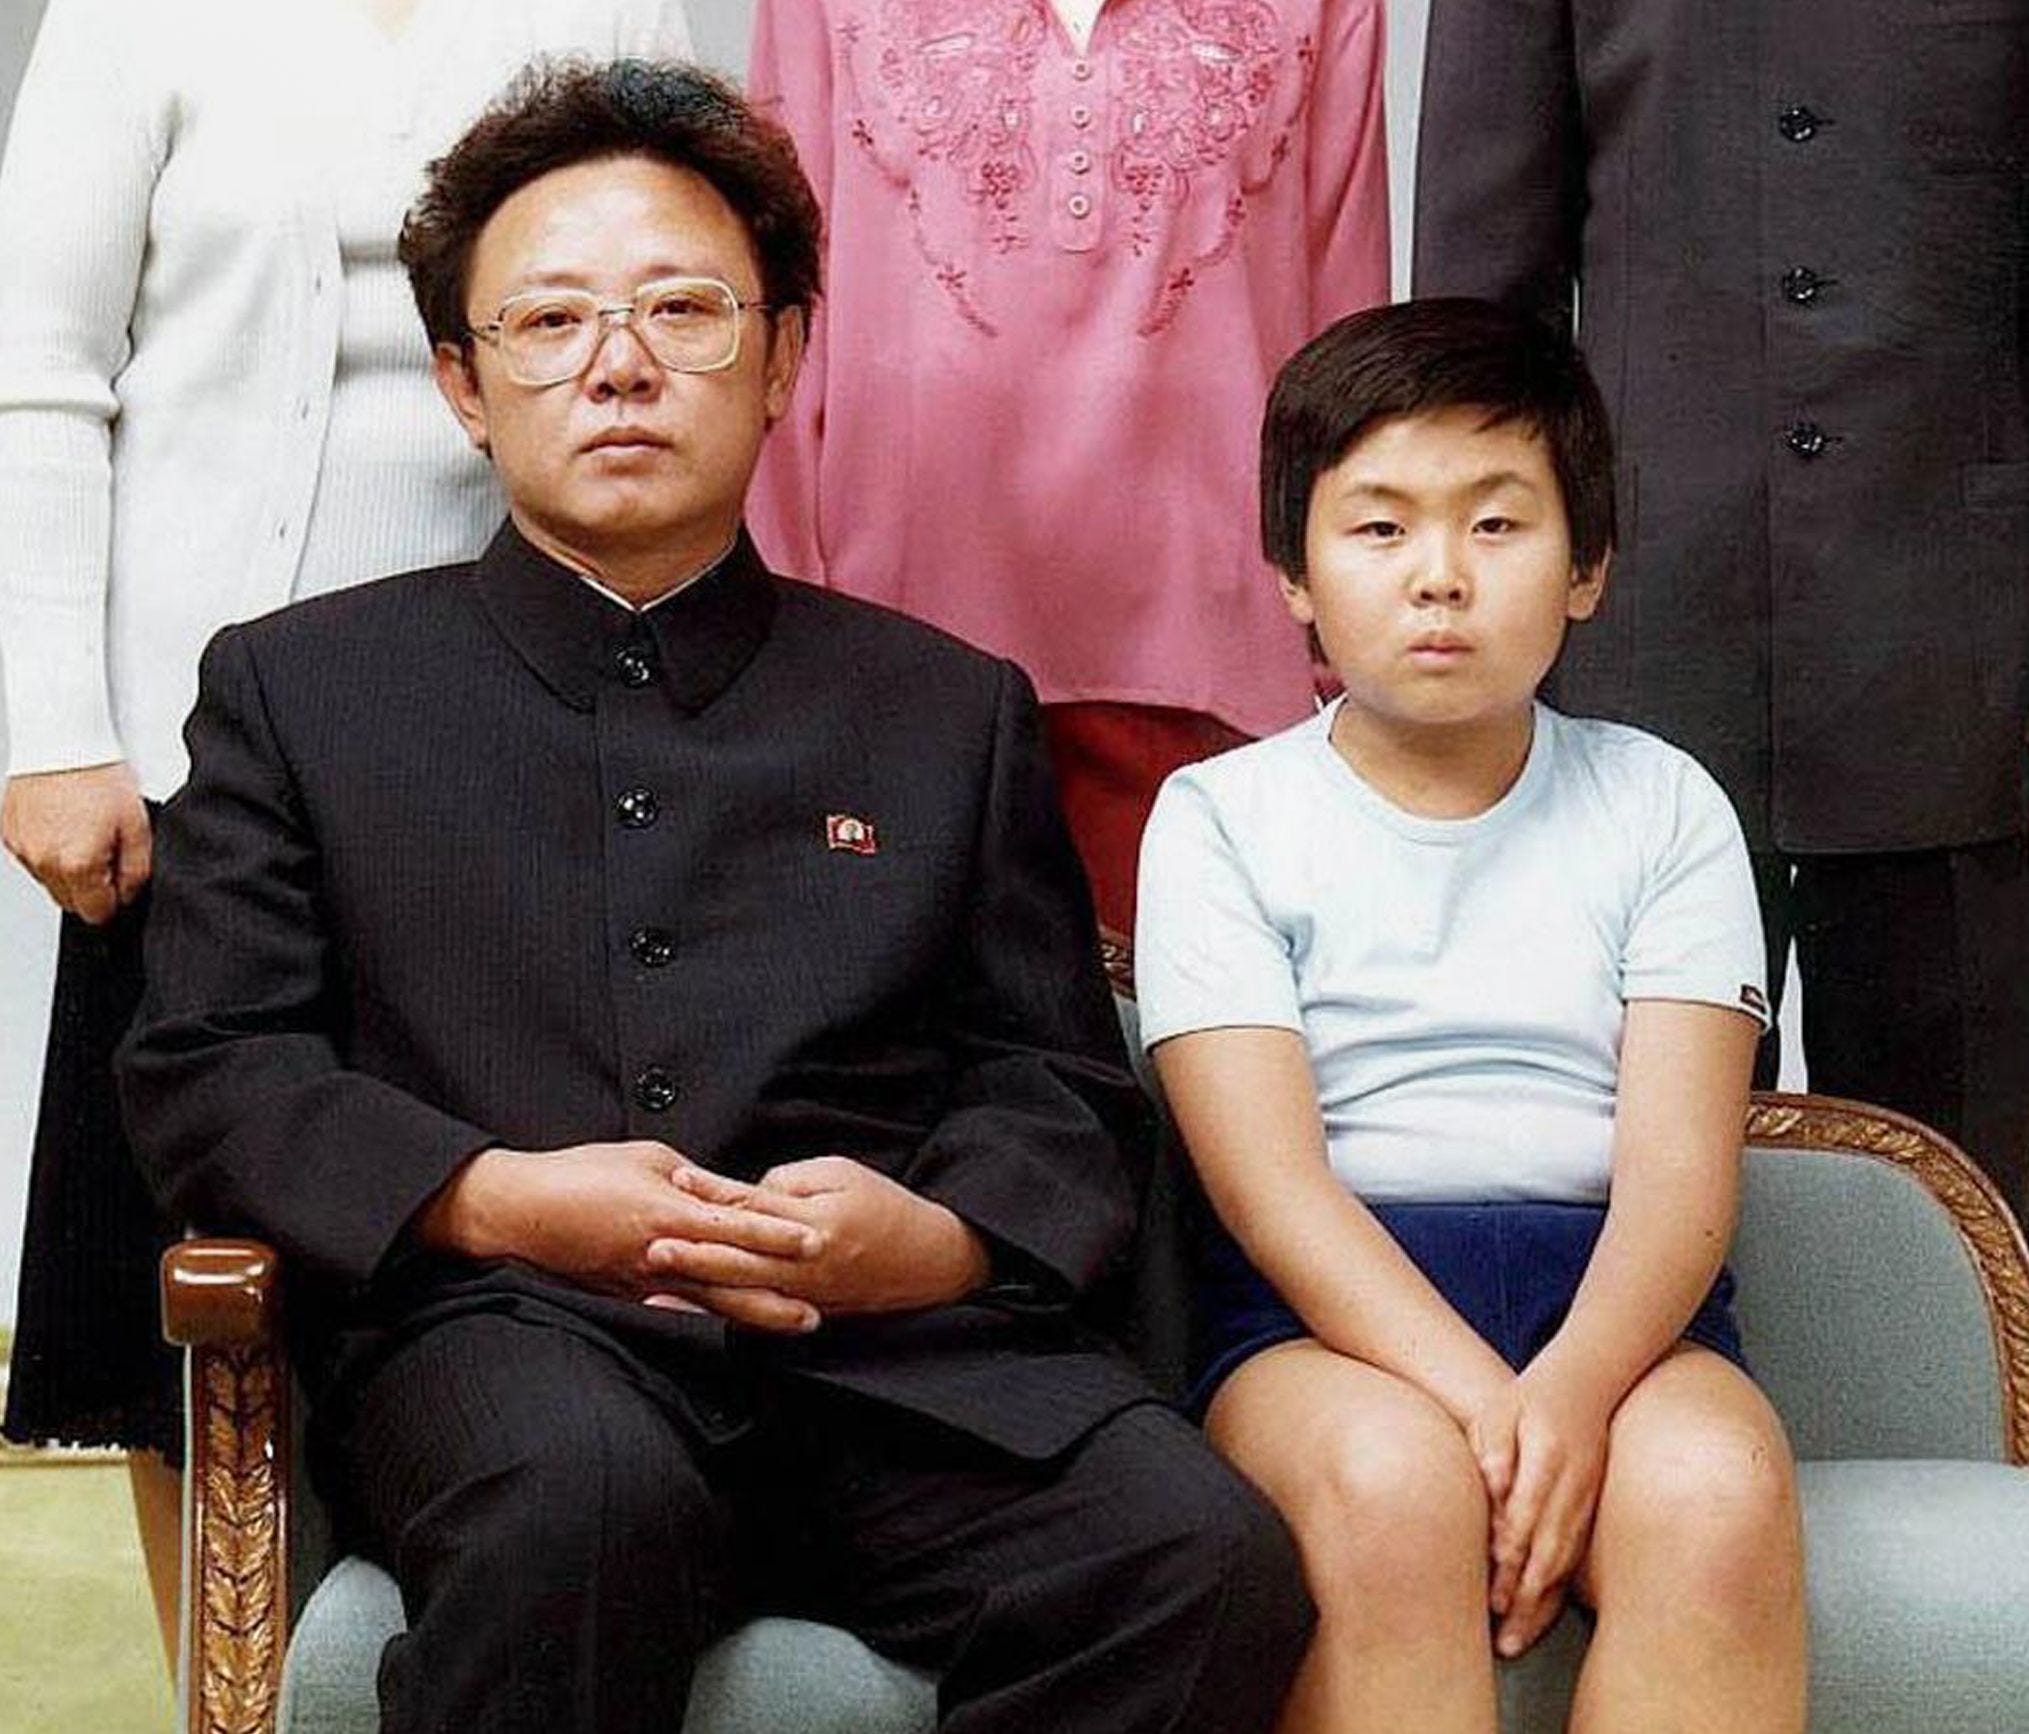 This file handout photo taken on Aug. 19, 1981 and released to AFP in 2000 shows North Korean leader Kim Jong-Il with his son, Kim Jong-Nam for a family portrait in Pyongyang.